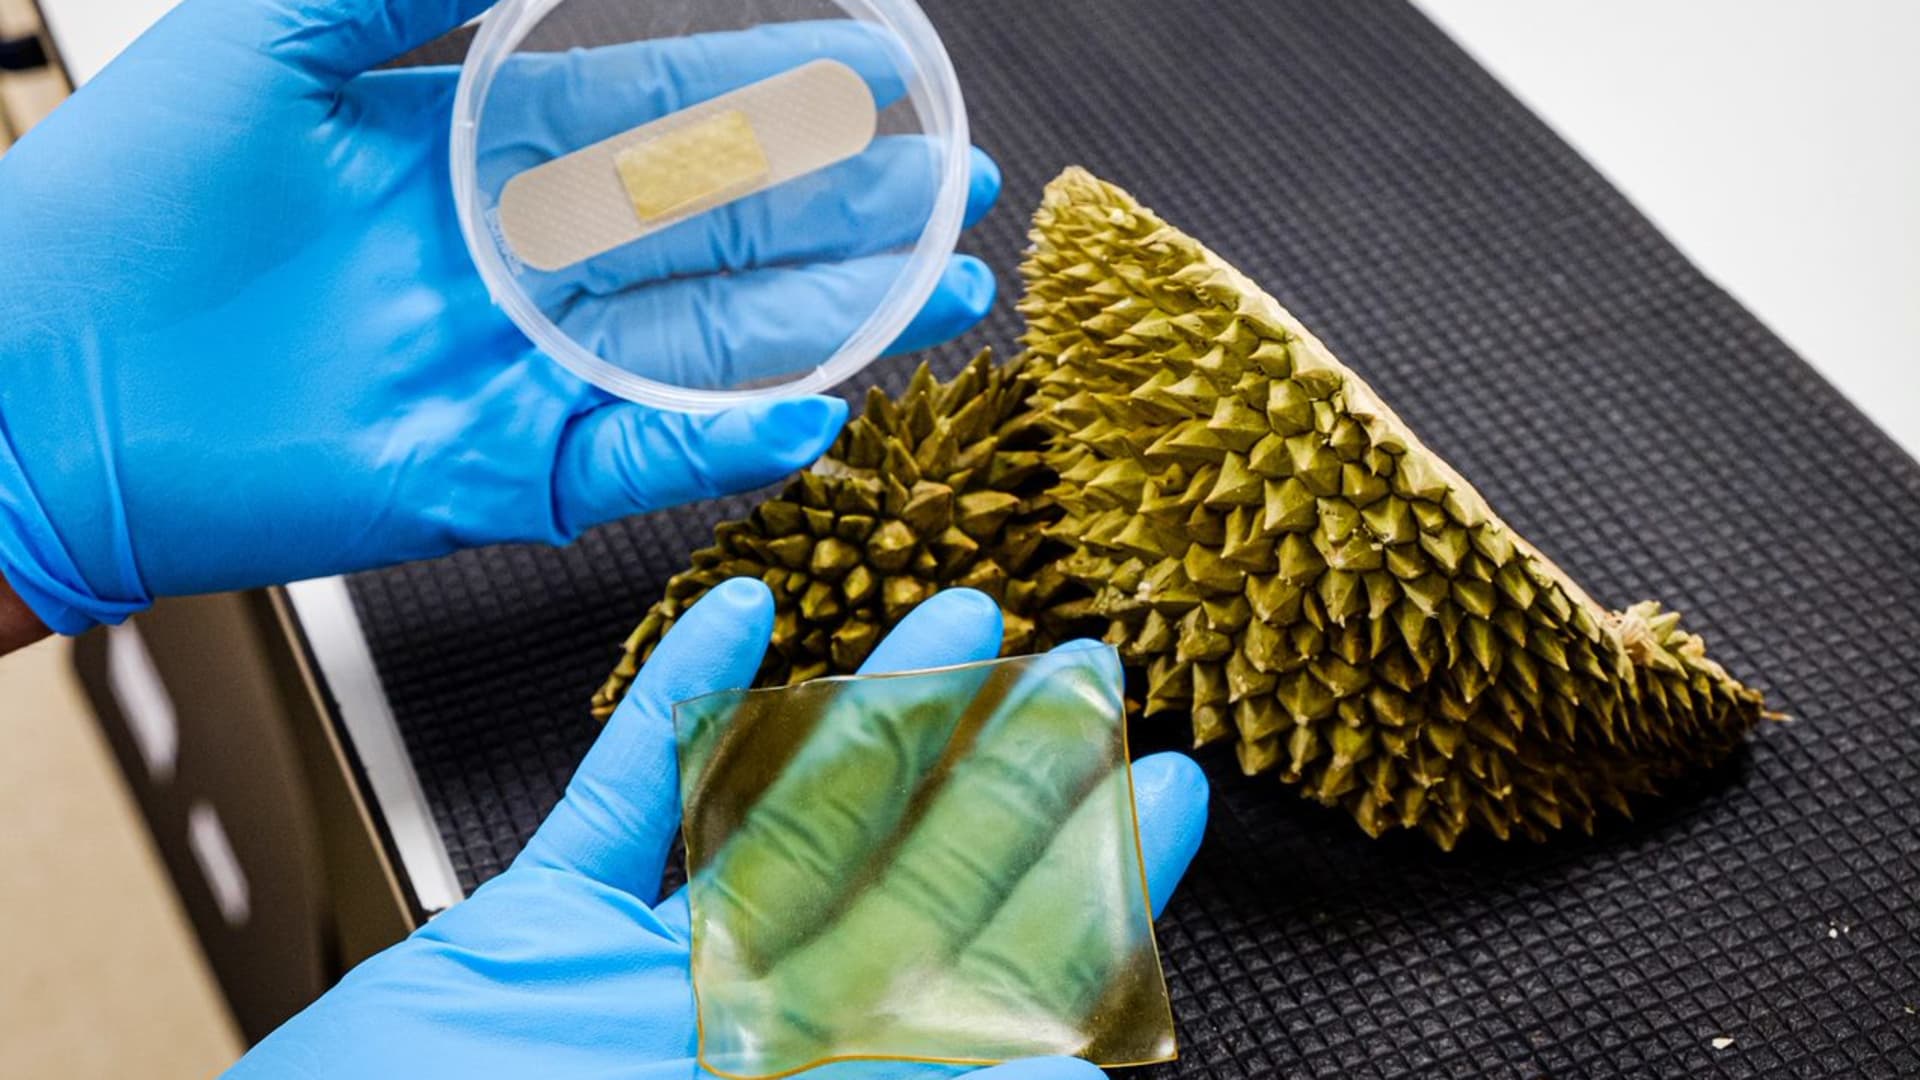 Scientists at Nanyang Technological University developed a hydrogel bandage made of upcycled durian husks.